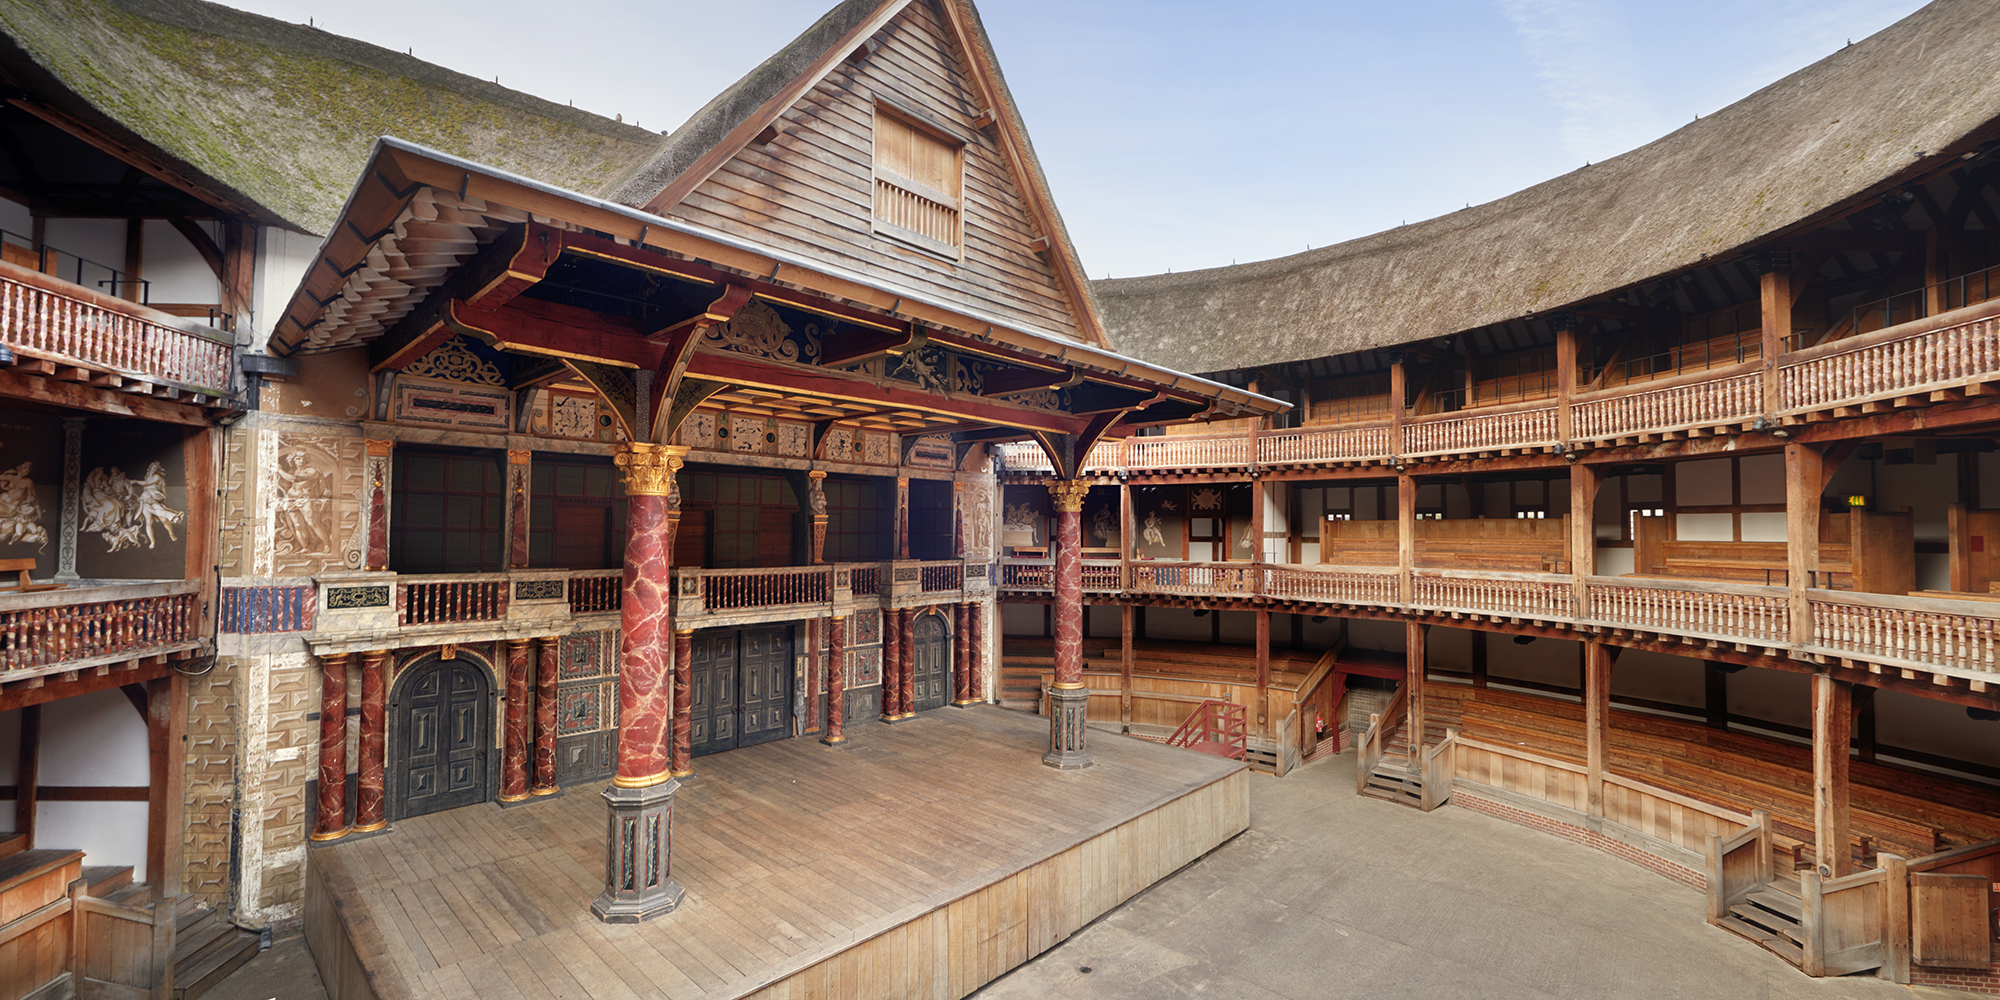 Interior shot of a circular timber theatre, with a wooden thrust stage, with two large pillars holding up a thatched roof